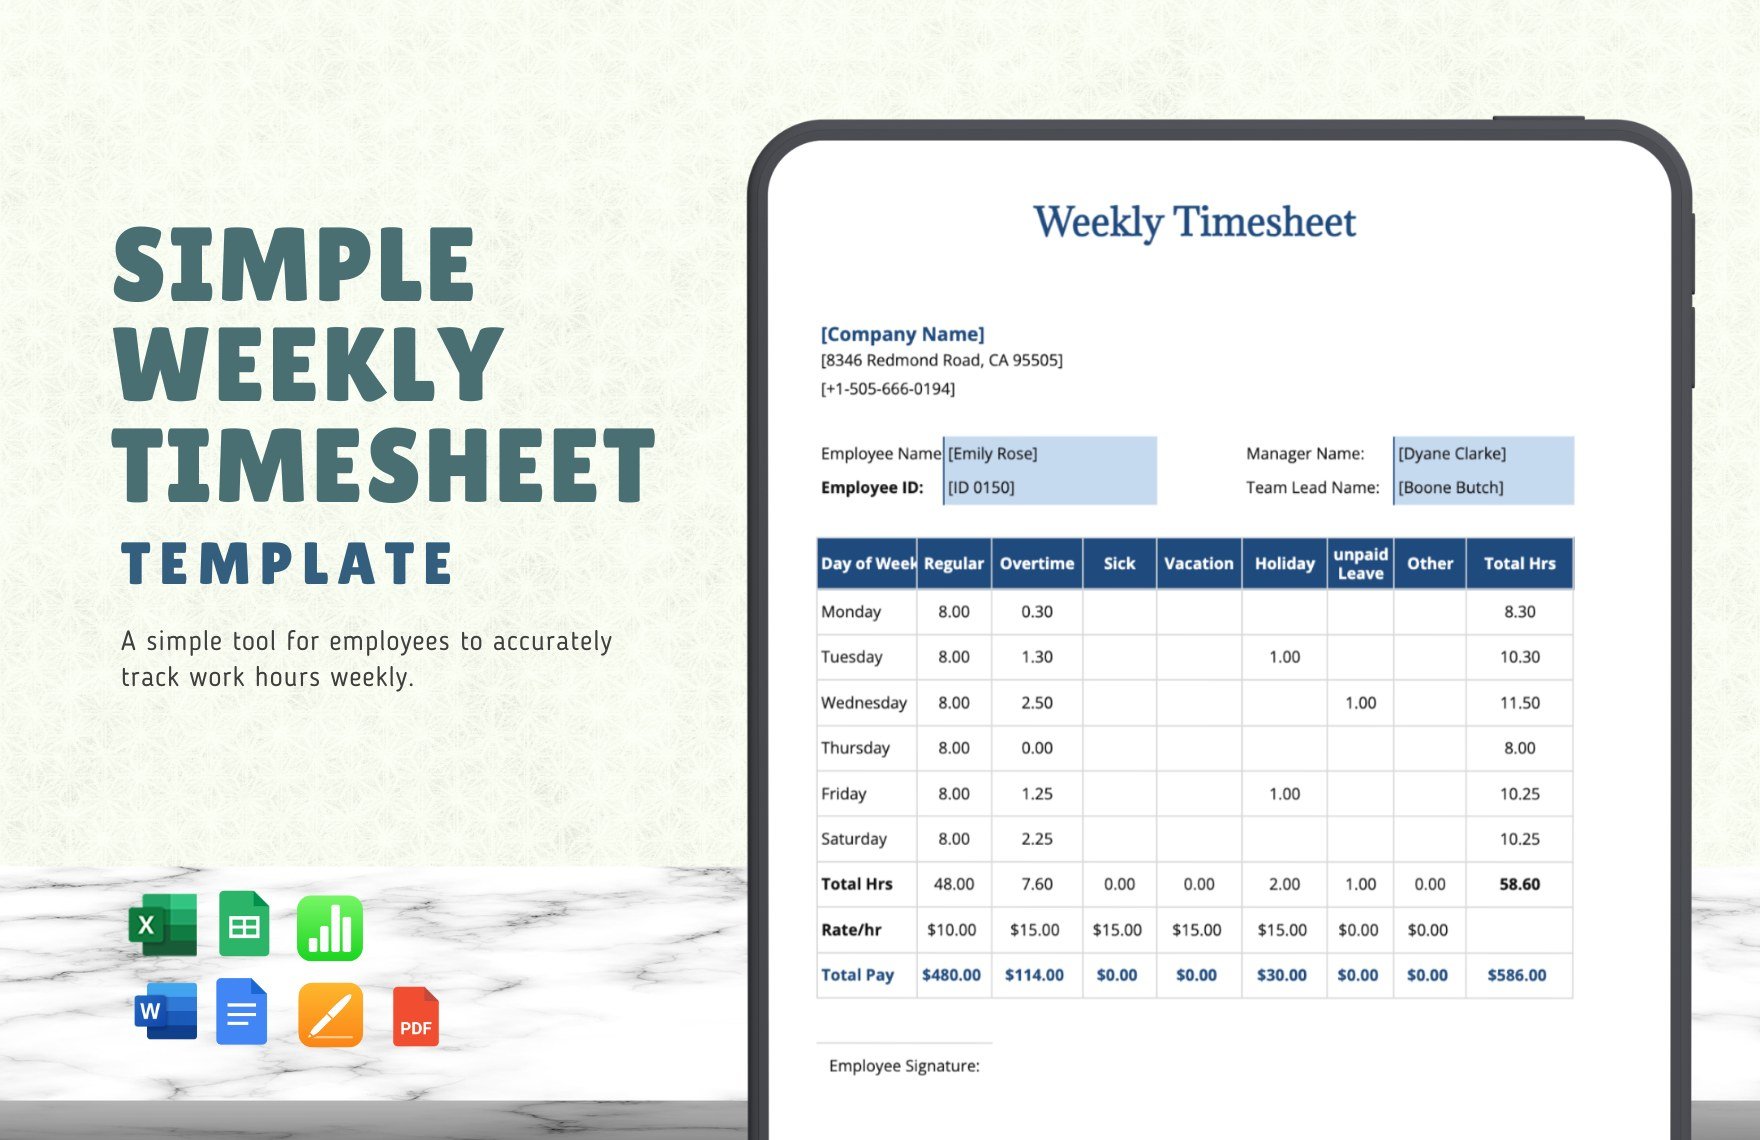 Free Simple Weekly Timesheet Template in Word, Google Docs, Excel, PDF, Google Sheets, Apple Pages, Apple Numbers